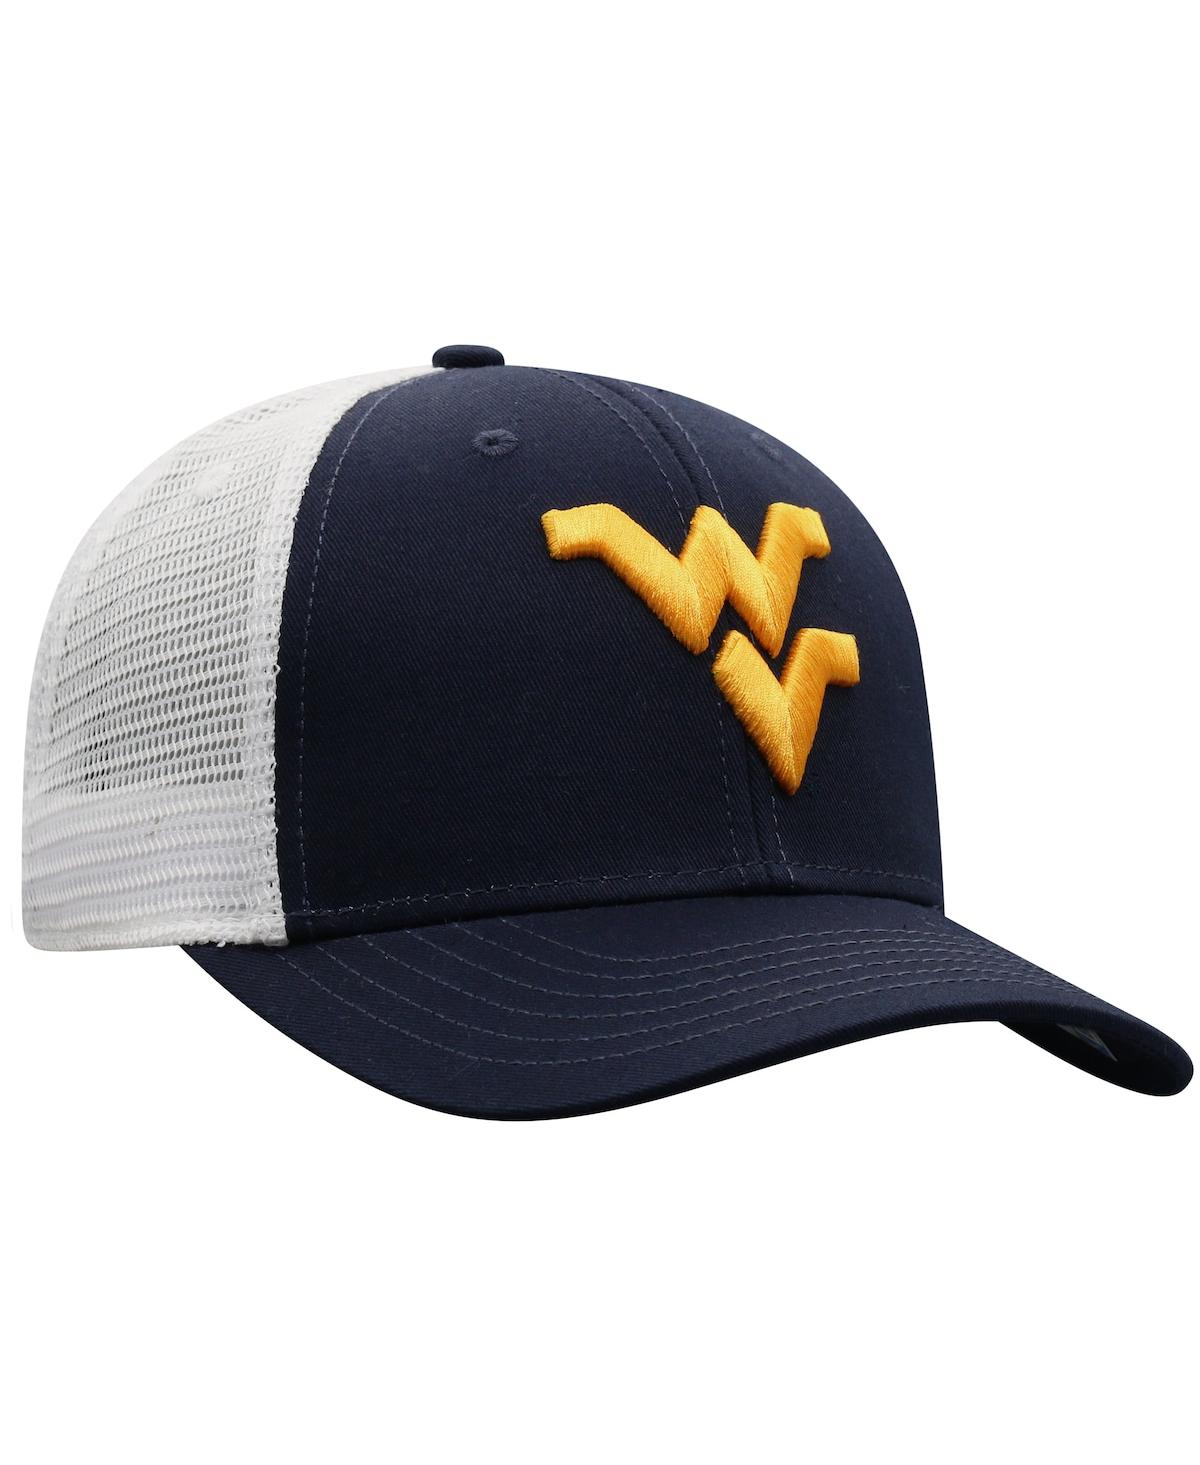 Shop Top Of The World Men's  Navy, White West Virginia Mountaineers Trucker Snapback Hat In Navy,white